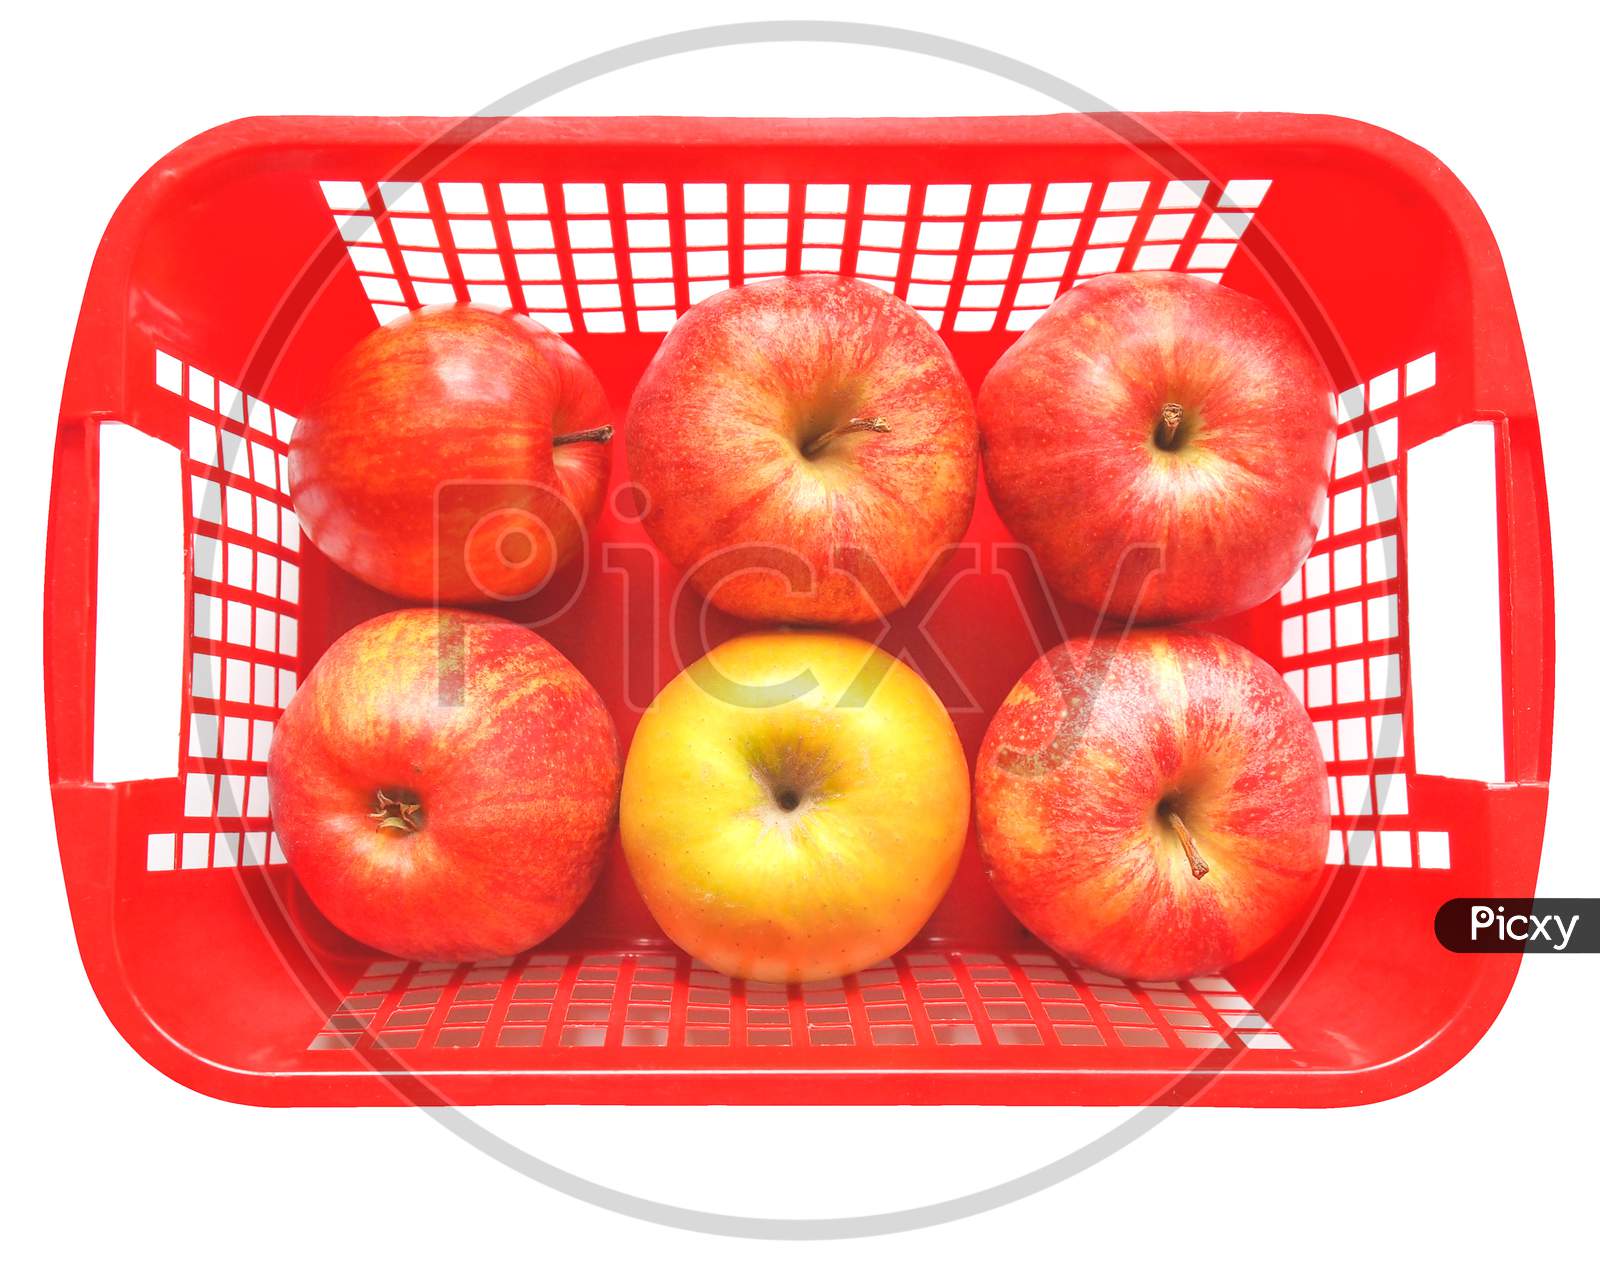 Red Apples In A Basket